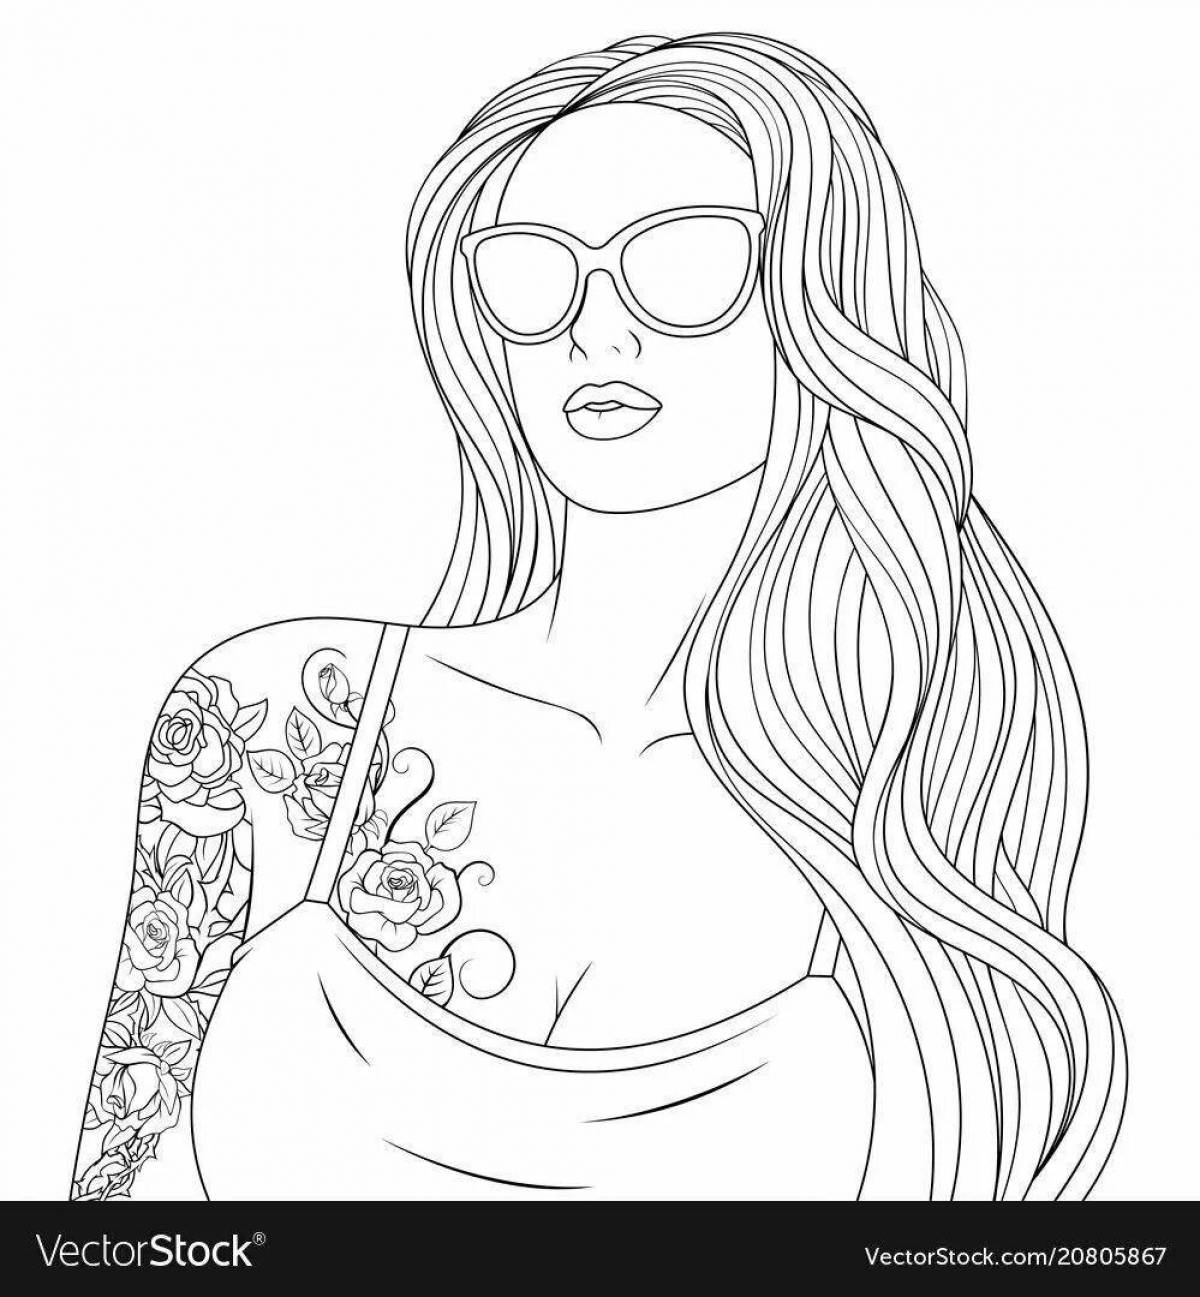 Amazing coloring pages for 18 year old girls